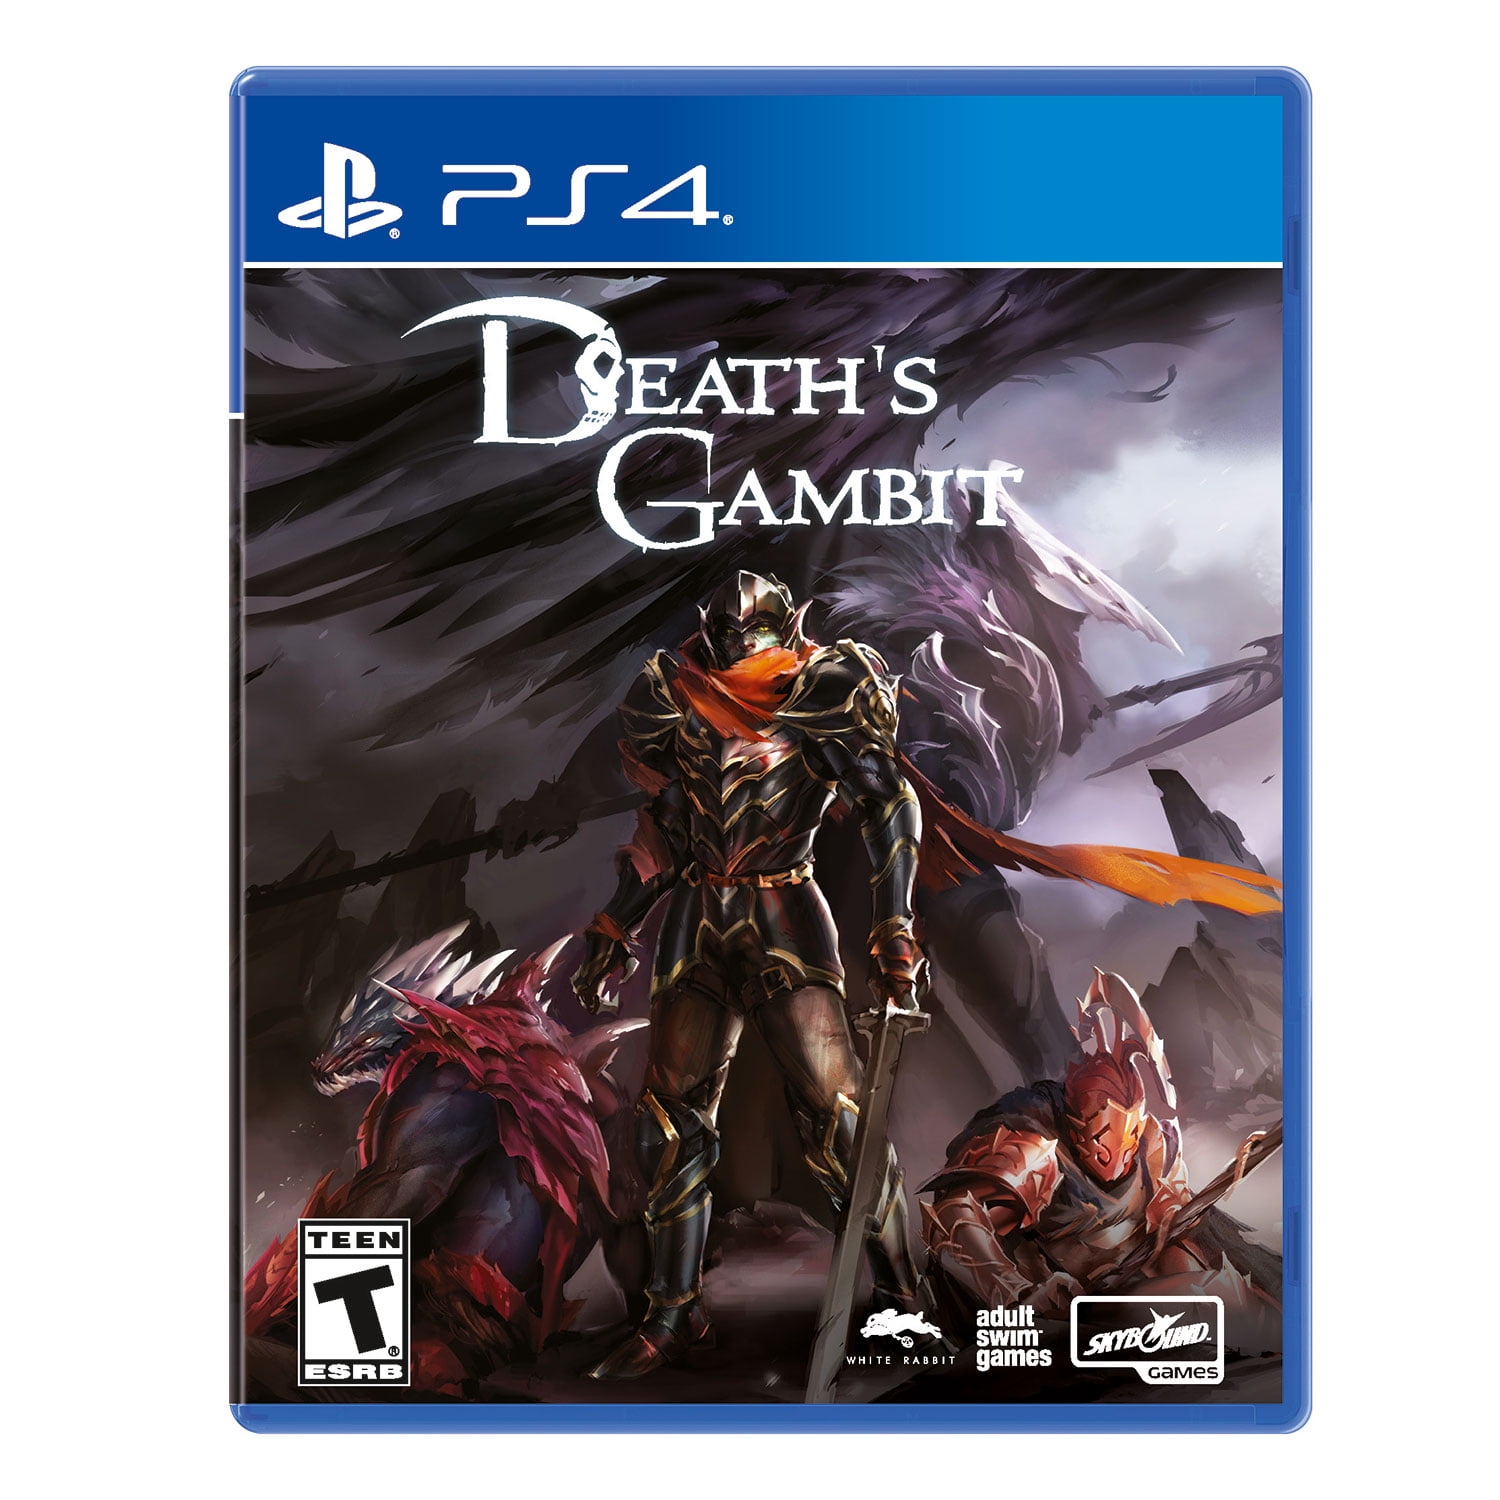 Trailer] Expanded Version of 'Death's Gambit' Arrives September 30 For PC  And Nintendo Switch; PlayStation 4 Version to Follow - Bloody Disgusting